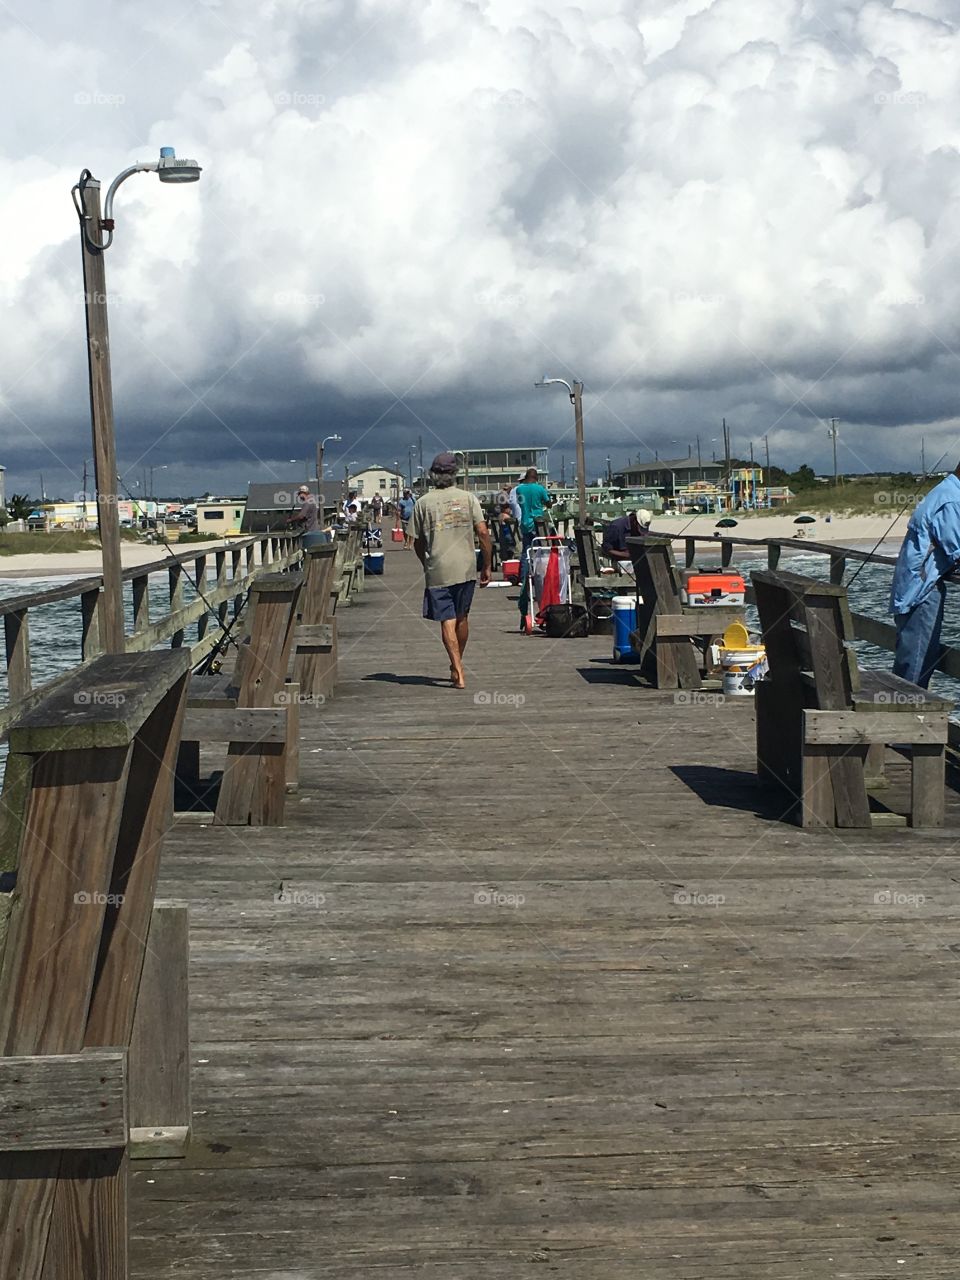 This older man walking down the pier seemed very much at home there: walking barefoot, pausing to talk to people, and then picking up his own line to fish. 